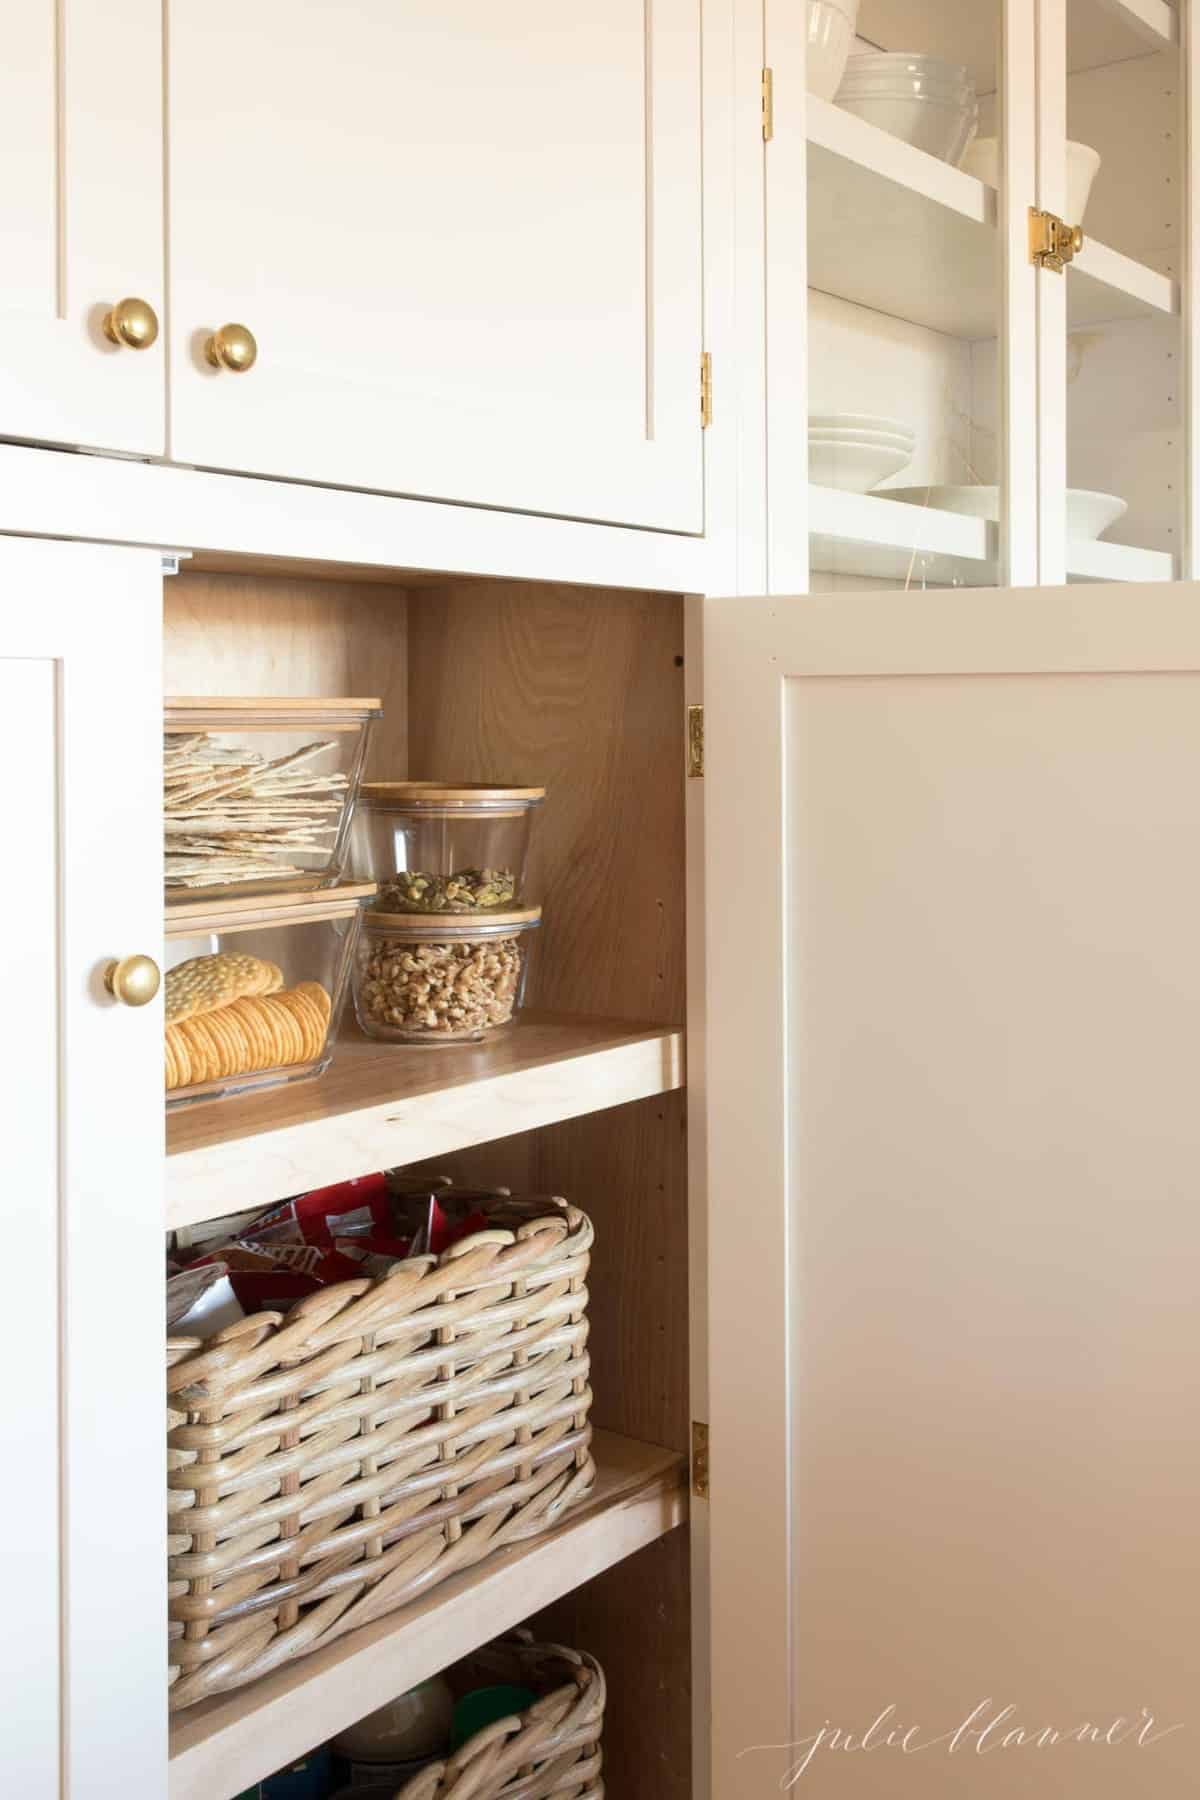 Inset kitchen cabinets with the doors open and pantry goods inside.